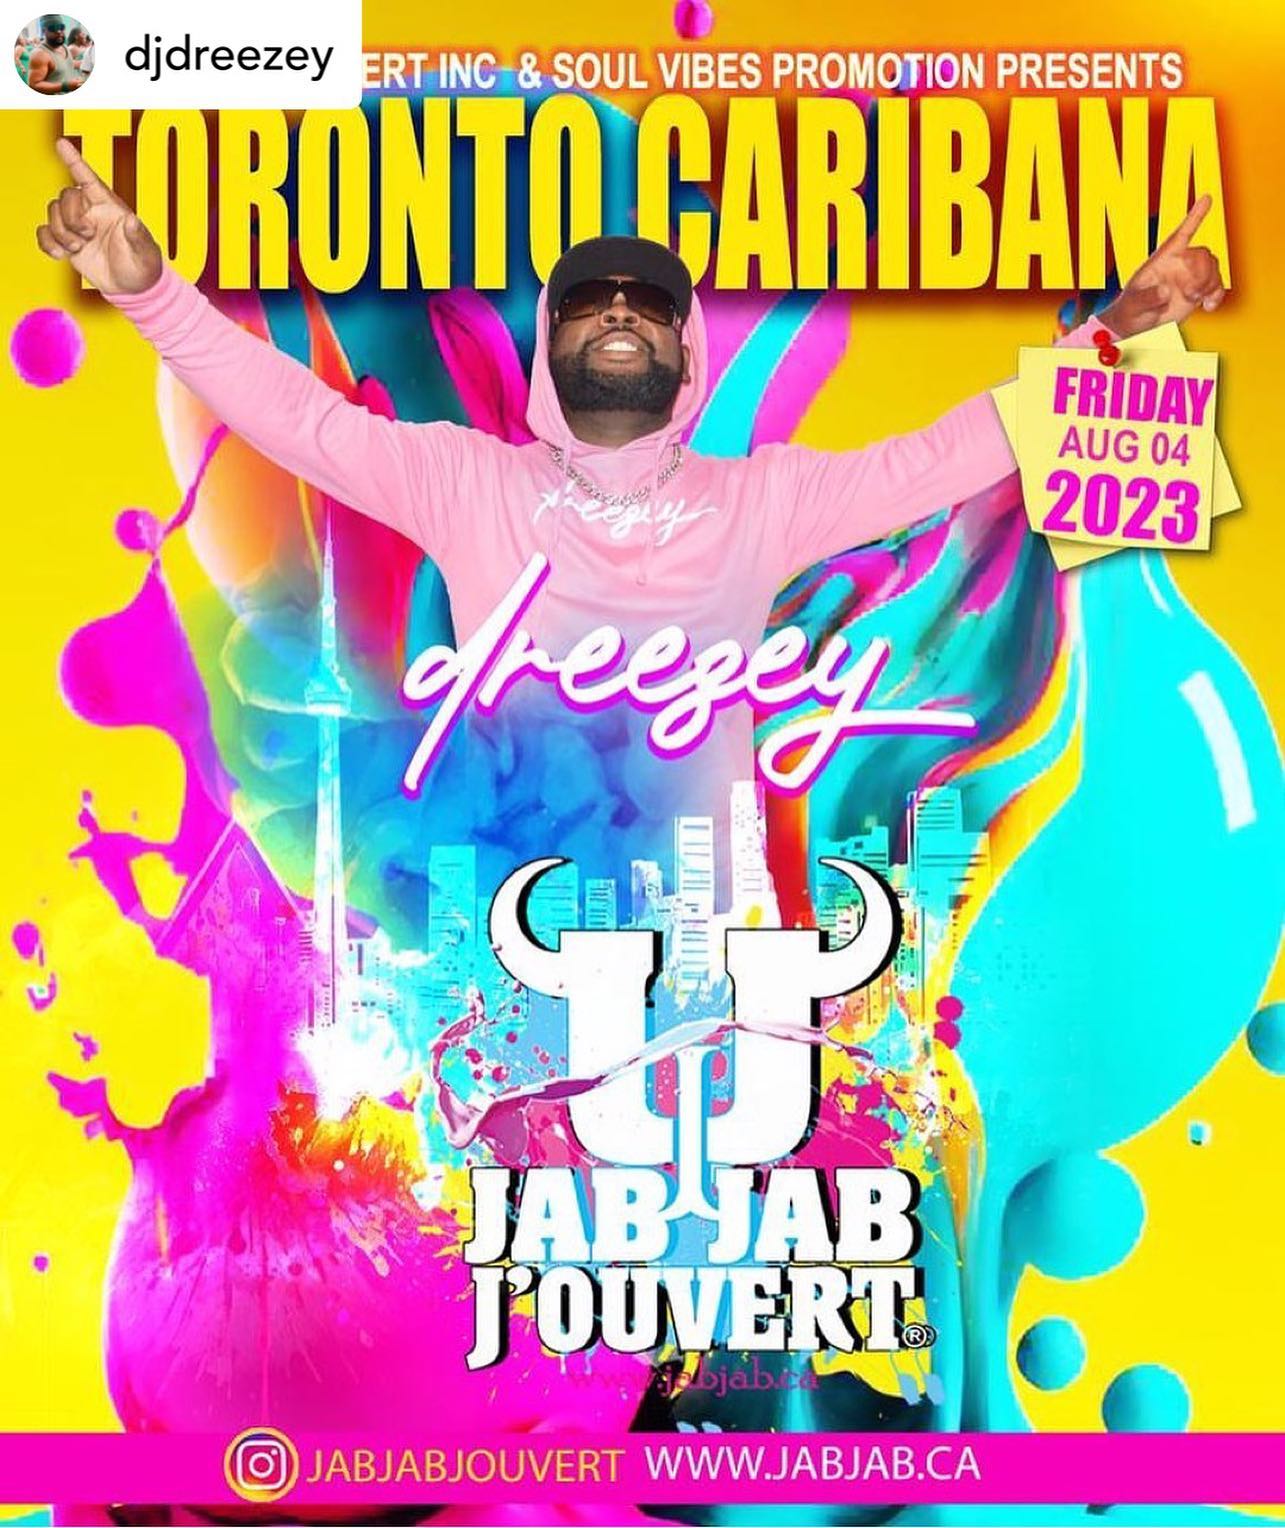 FRIDAY August 4th Canada Celebrates 🍾

⛓️JAB JAB J'OUVERT DAY⛓️.

GET YOUR TICKETS and MEET ME at Markham Meadows

8100 Steeles Ave East
Markham ON 

: 3PM - 12AM 

Me and The Jab Jab J’ouvert Family is Ready 


🎟 Secure your Tickets now at:
www.jabjab.ca
www.Ticketgateway.com 
www.eventbrite.com

#jouvert 